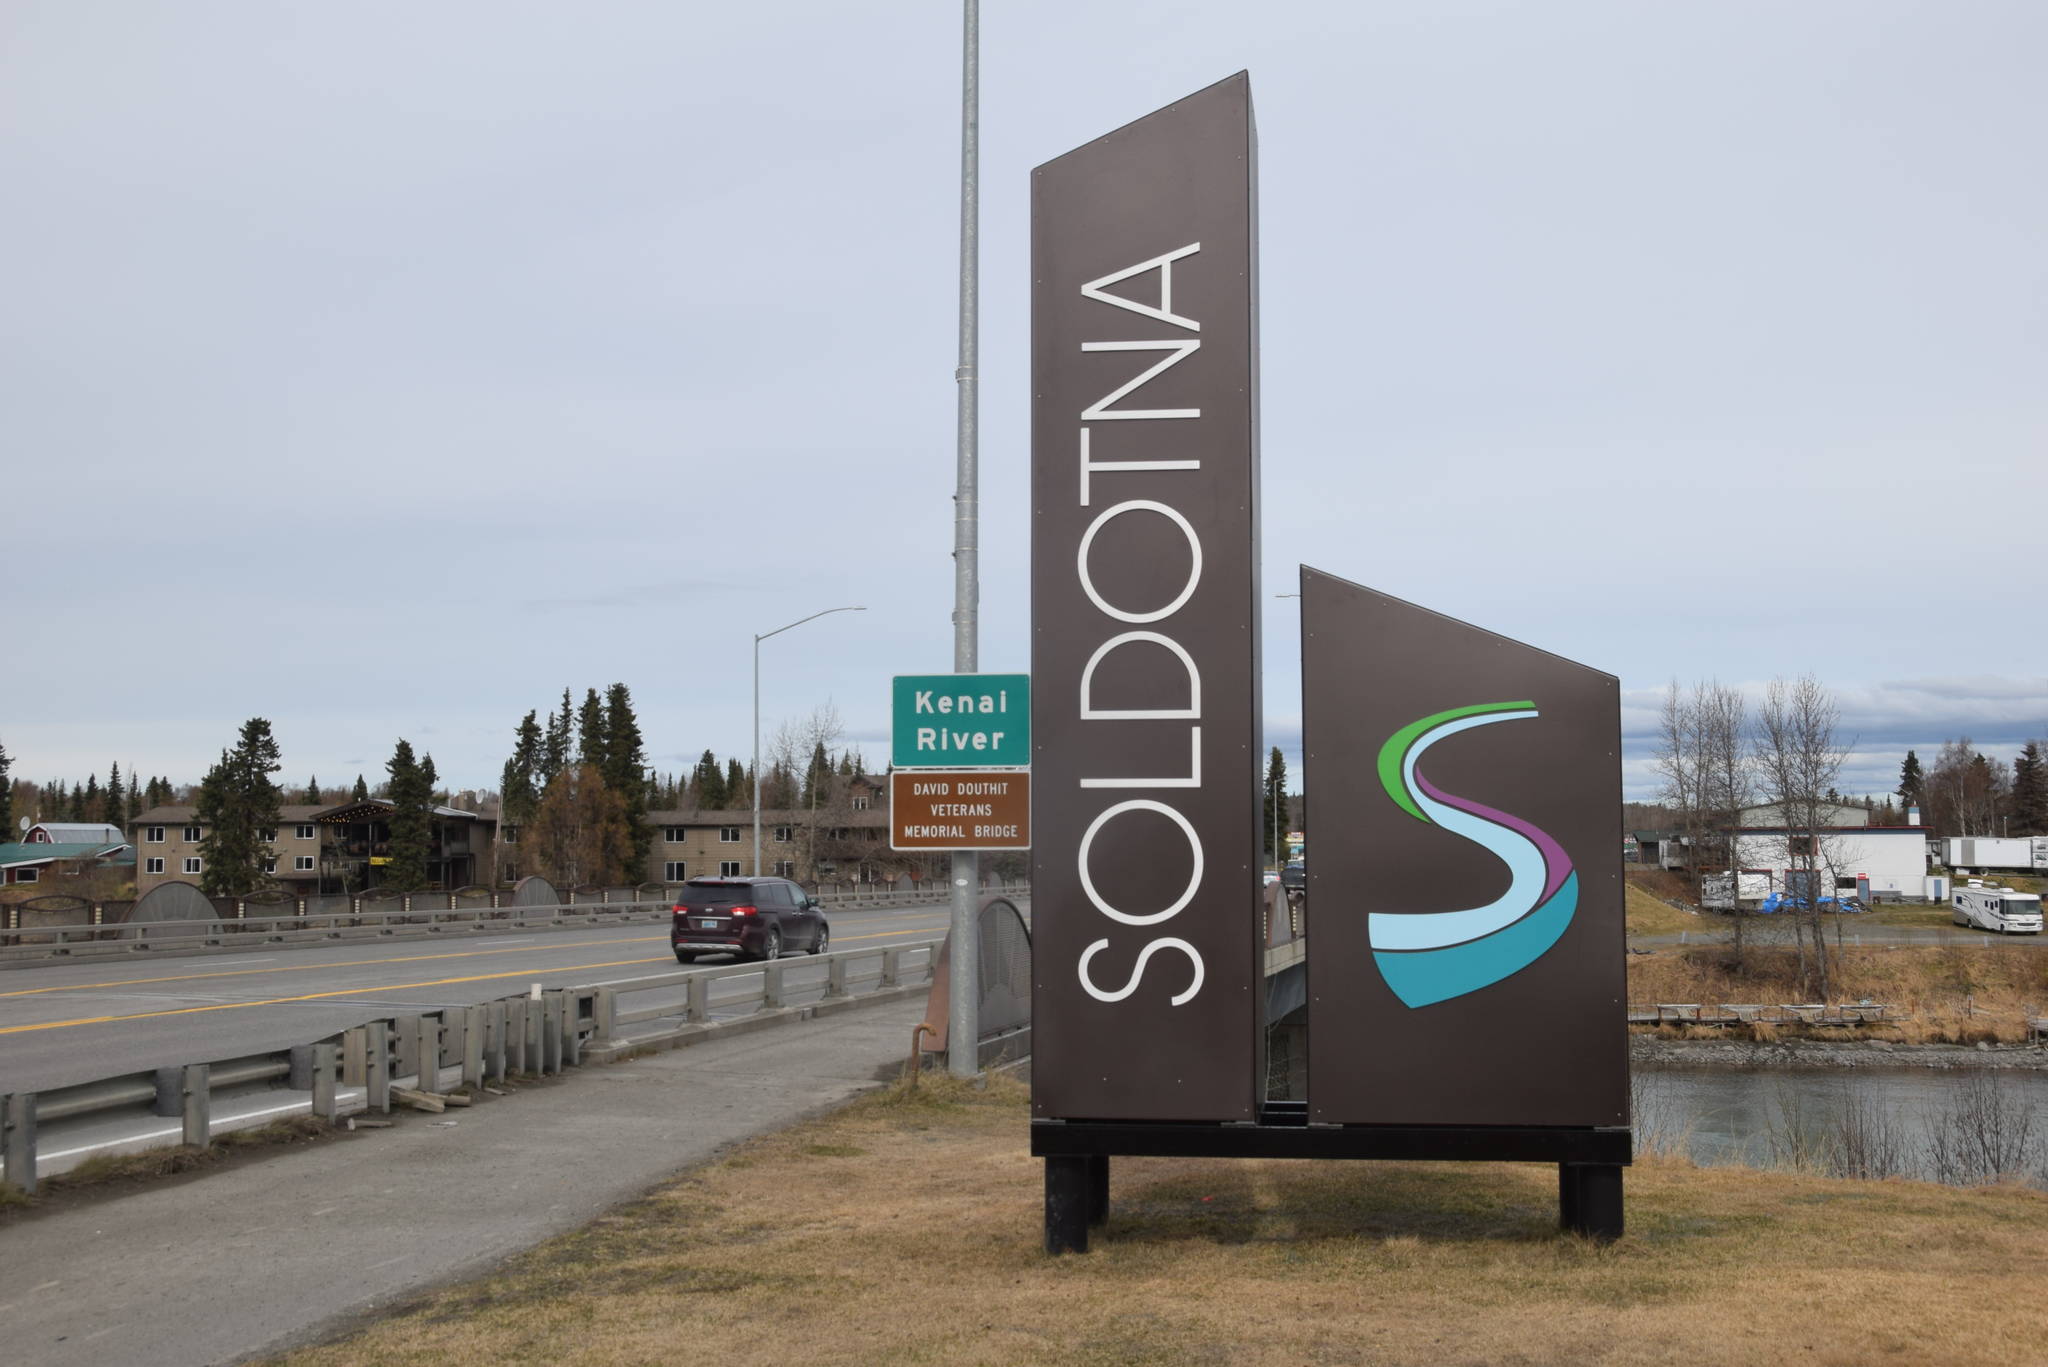 A new sign welcoming people to the City of Soldotna stands near the intersection of the Sterling Highway and Kenai River on May 1, 2019, in Soldotna, Alaska. (Photo by Brian Mazurek/Peninsula Clarion)                                A new sign welcoming people to the City of Soldotna stands near the intersection of the Sterling Highway and Kenai River on May 1, 2019, in Soldotna, Alaska. (Photo by Brian Mazurek/Peninsula Clarion)